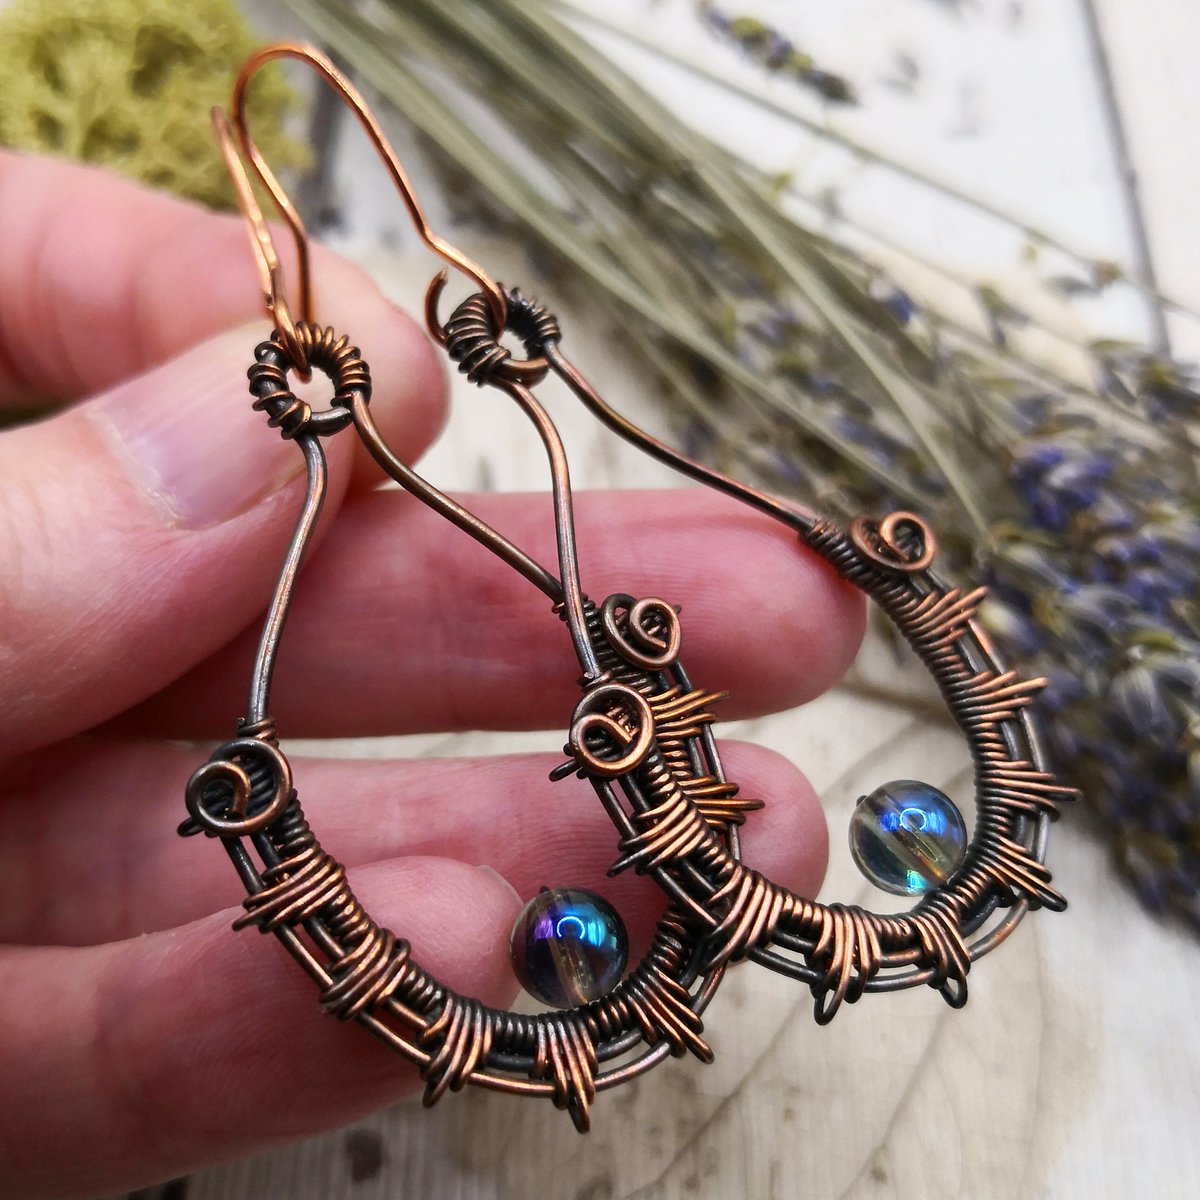 Just had to share these, I'm so happy how they turned out. I'll be listing them for sale very soon.

#copperjewelry #wirewrapping #wireart #dangleearrings #earringswag #earringoftheday #gemstonejewellery #auraquartz #thetwistedkitty #etsyseller #jewelleryartist #bhselling